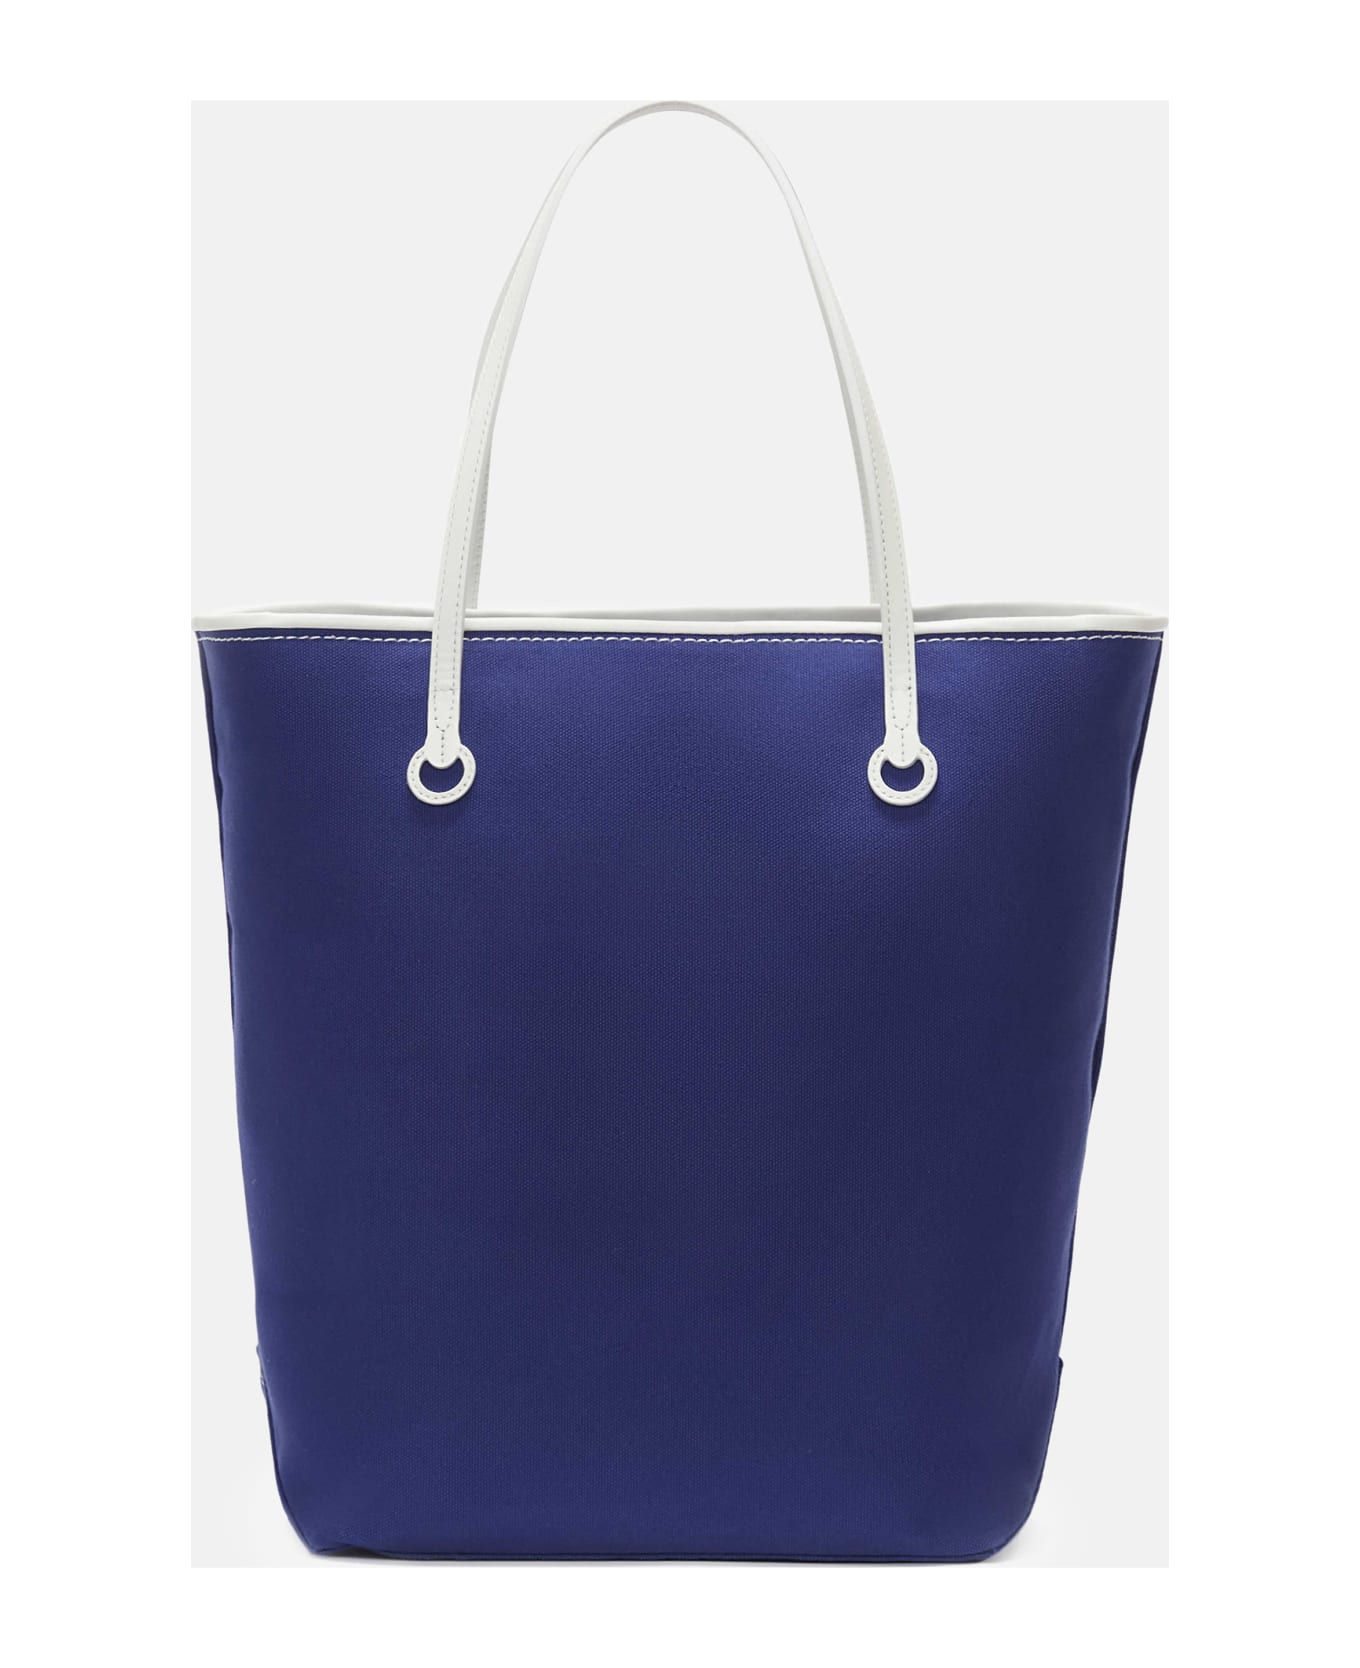 J.W. Anderson Anchor Tall Tote - Blue